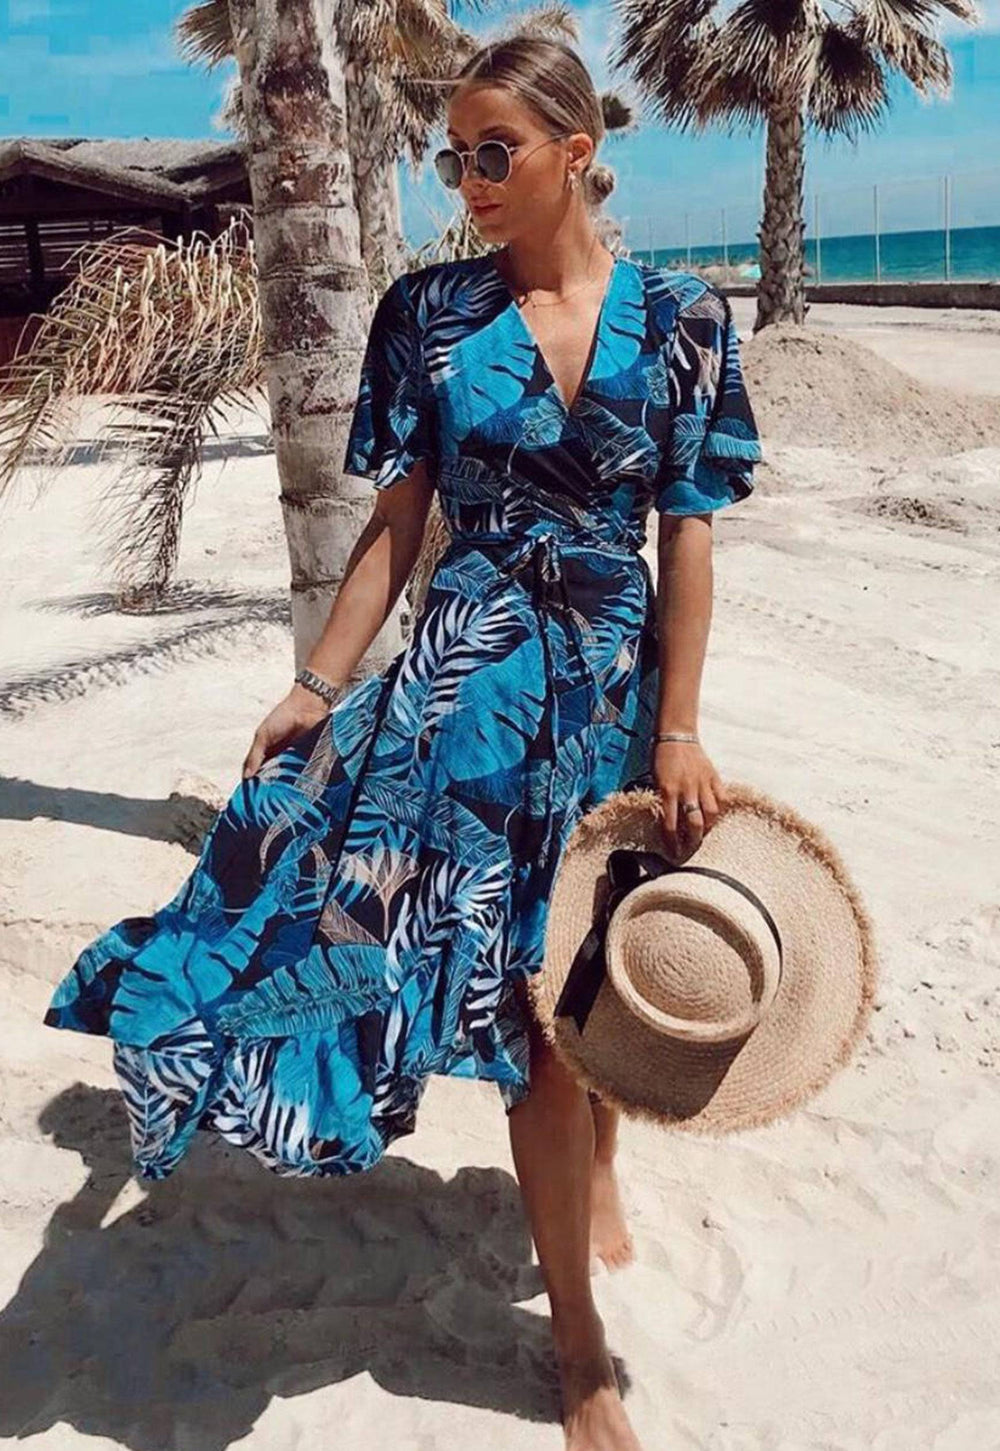 Palm Leaf Print Wrap Over Midi Dress with Frill Skirt & Short Angel Sleeve in Navy Blue - One Nation Clothing